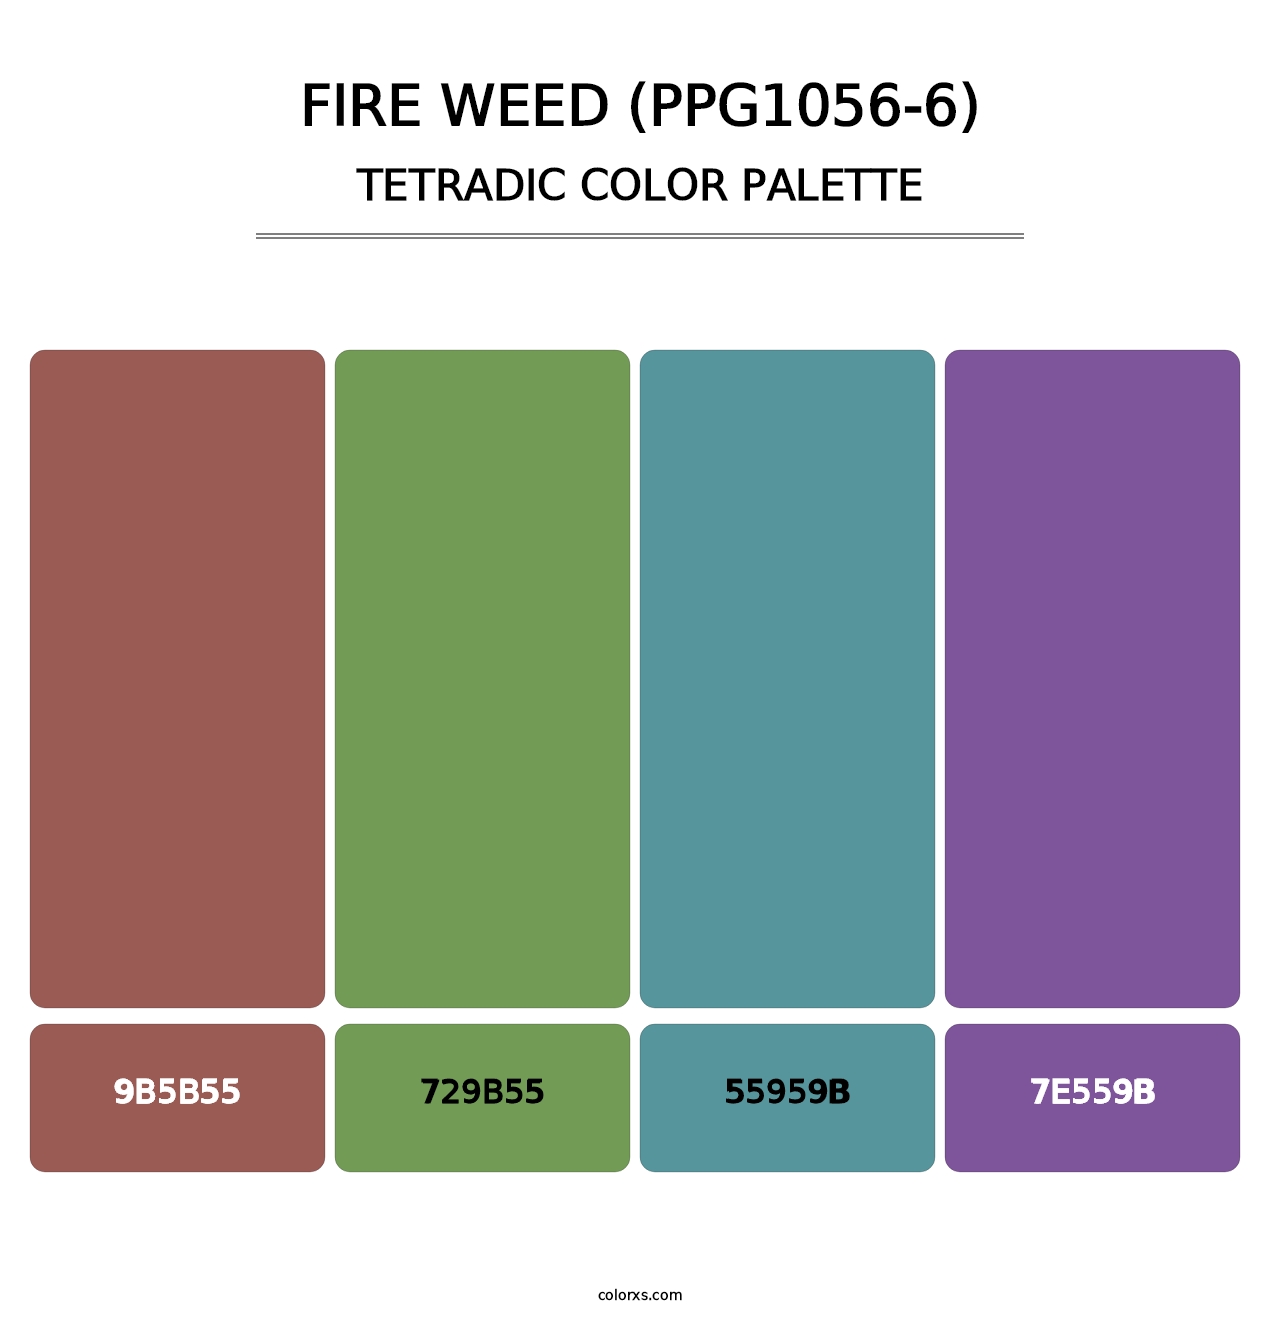 Fire Weed (PPG1056-6) - Tetradic Color Palette